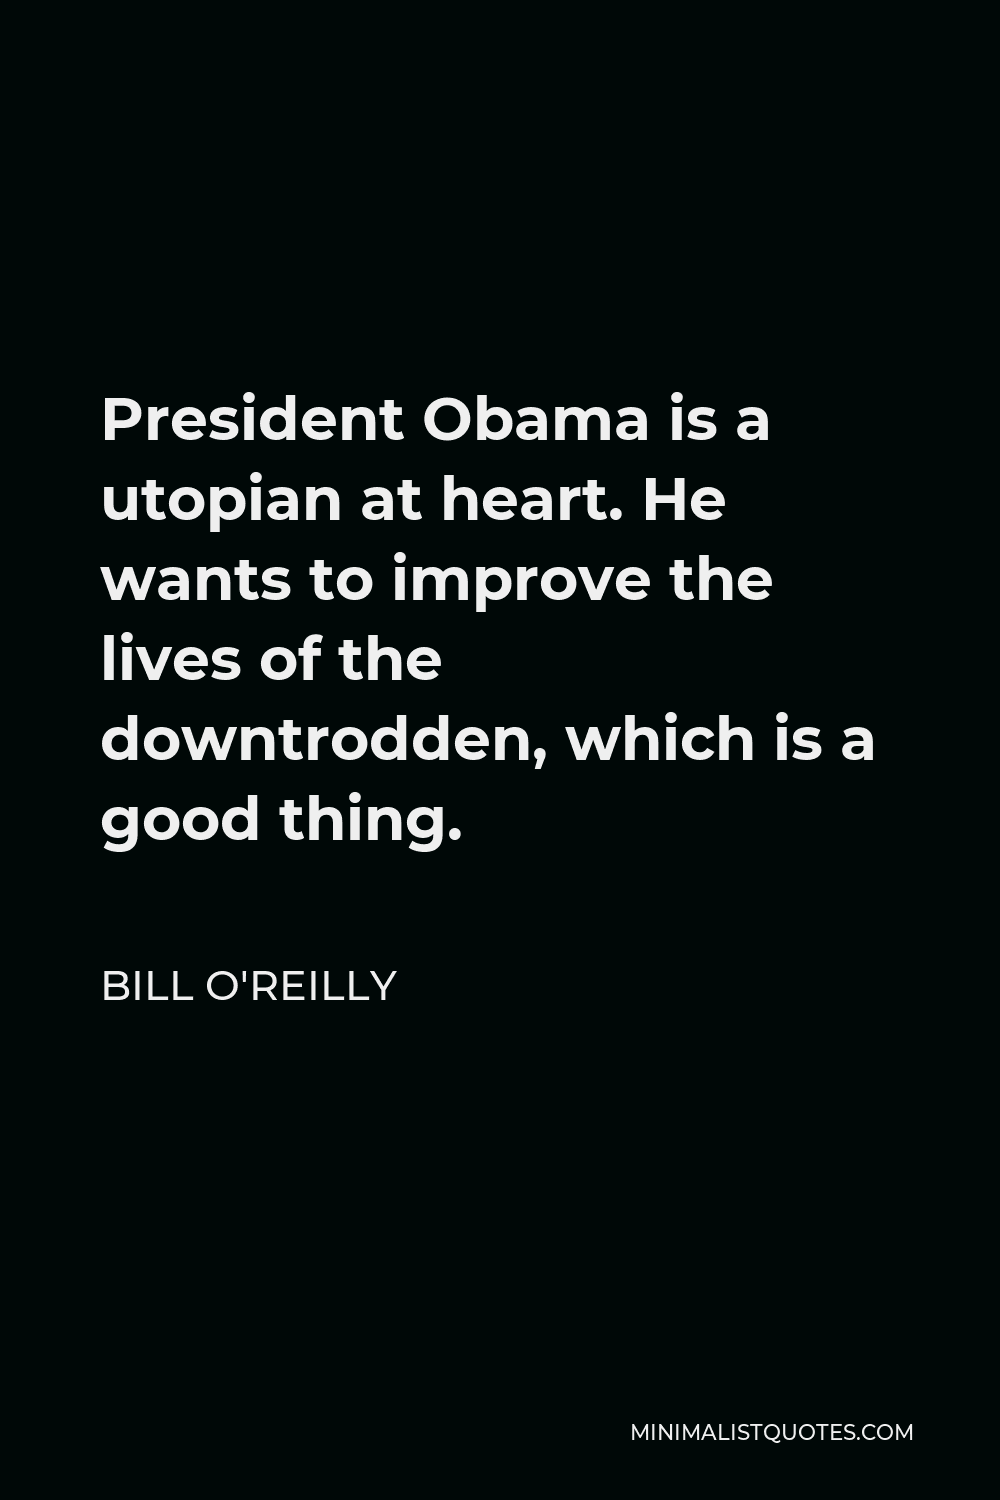 Bill O'Reilly Quote - President Obama is a utopian at heart. He wants to improve the lives of the downtrodden, which is a good thing.